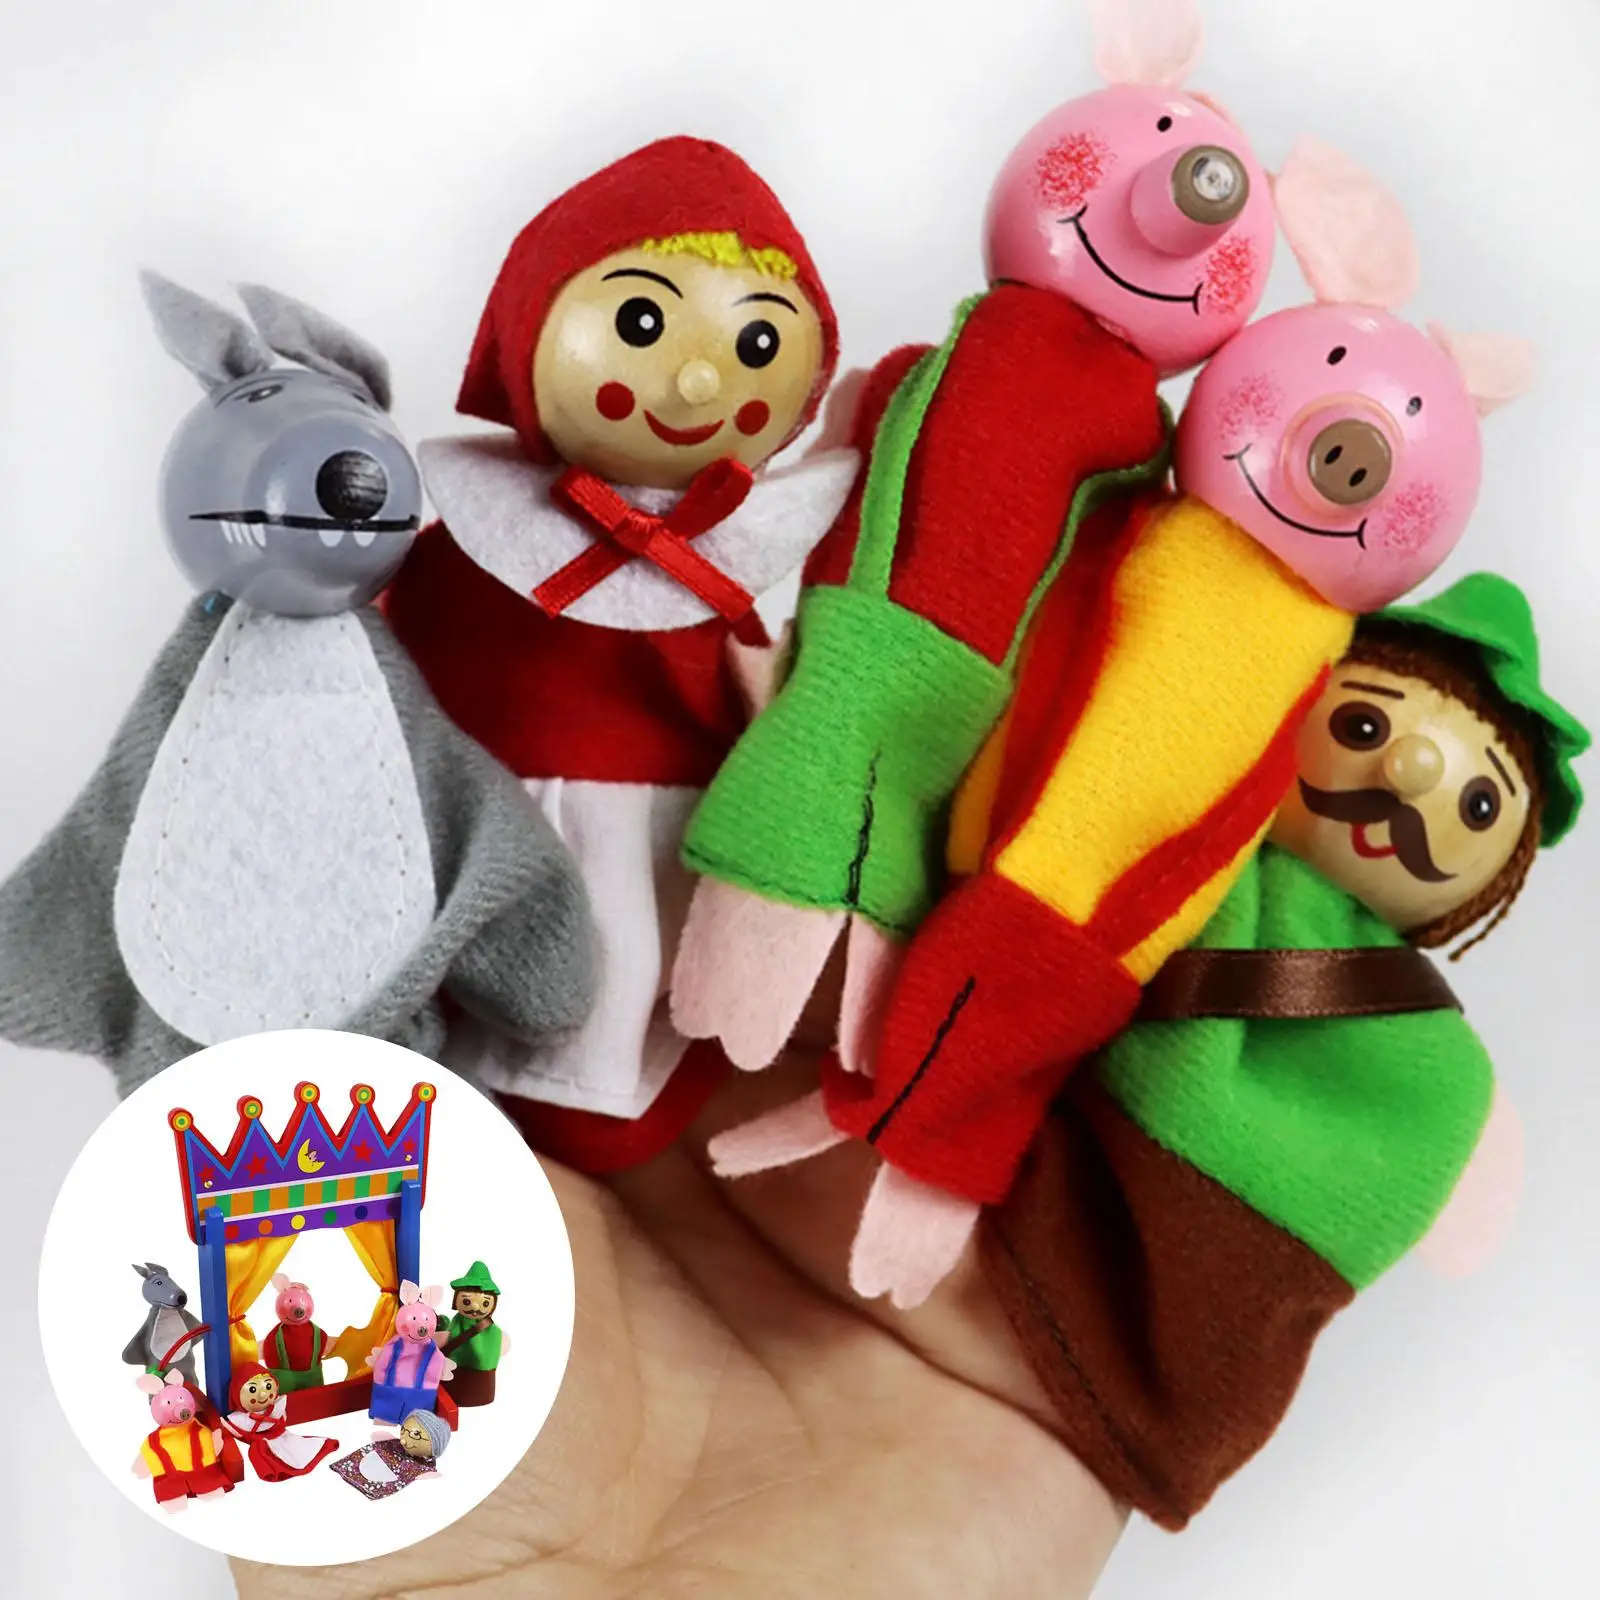 Simulation Finger Puppets Model Decorations Wooden for Bookshelf Parties